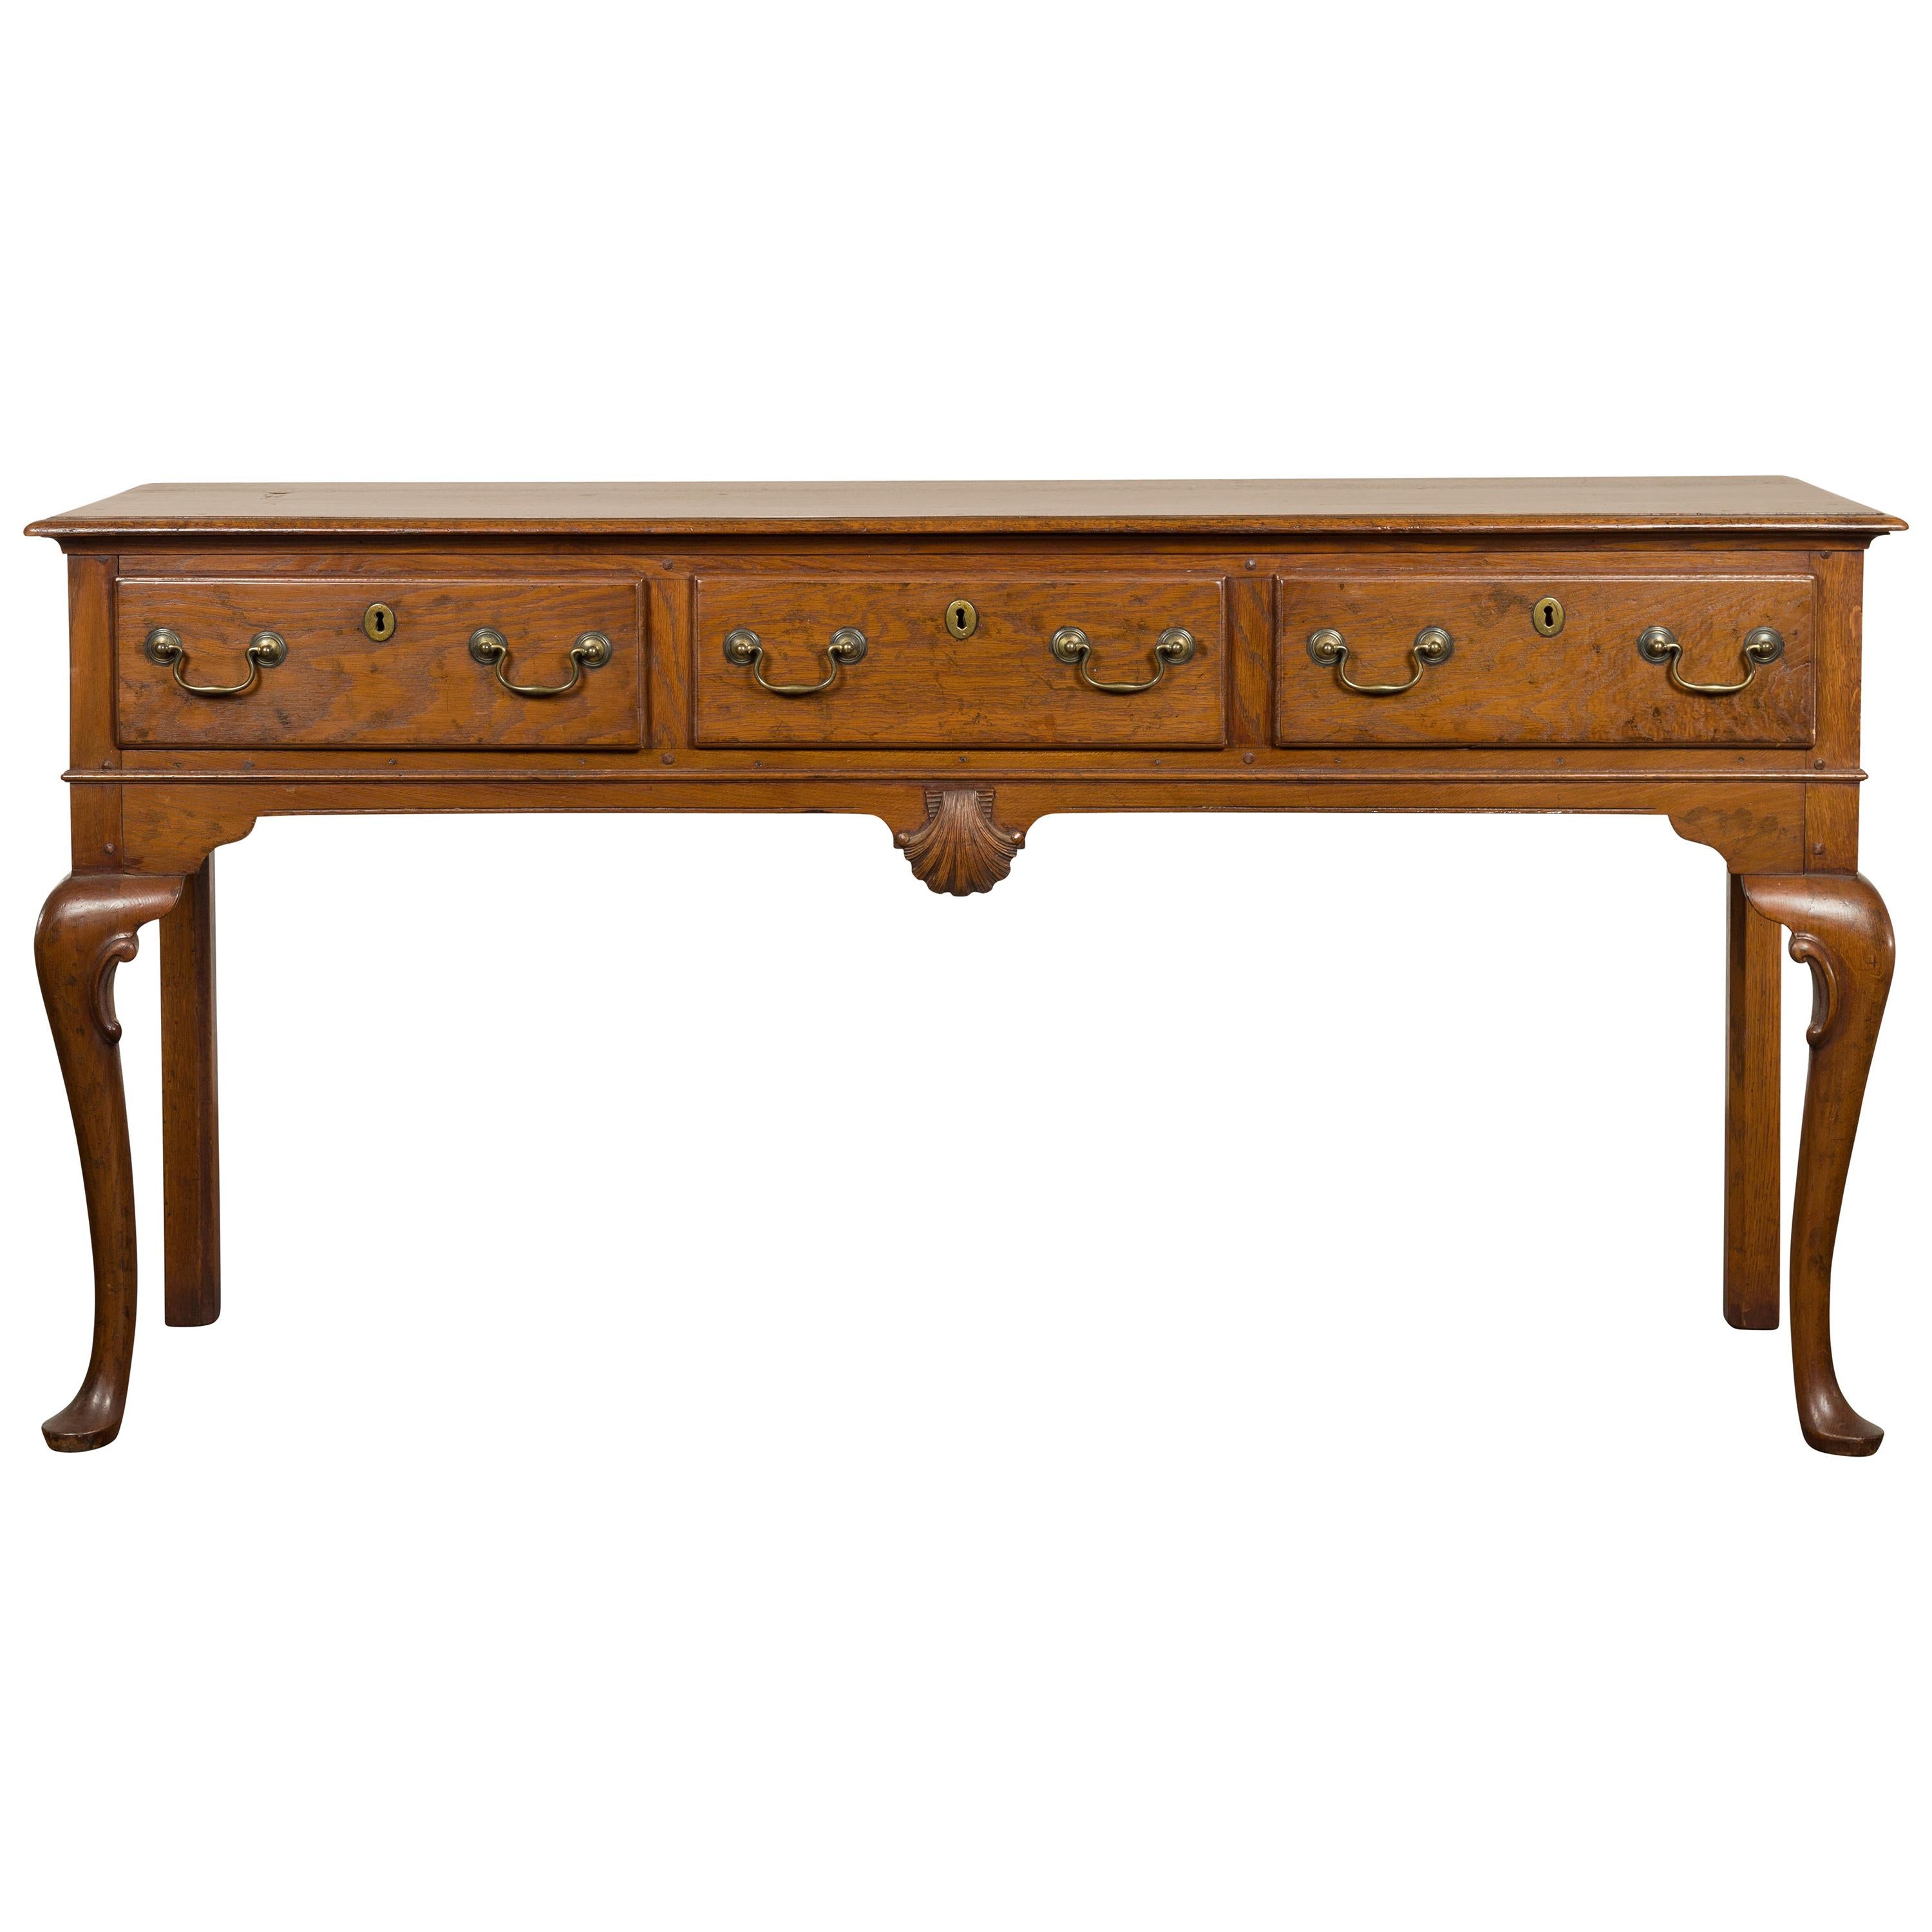 English 1900s Oak Dresser Base with Drawers, Cabrioles Legs and Carved Shell